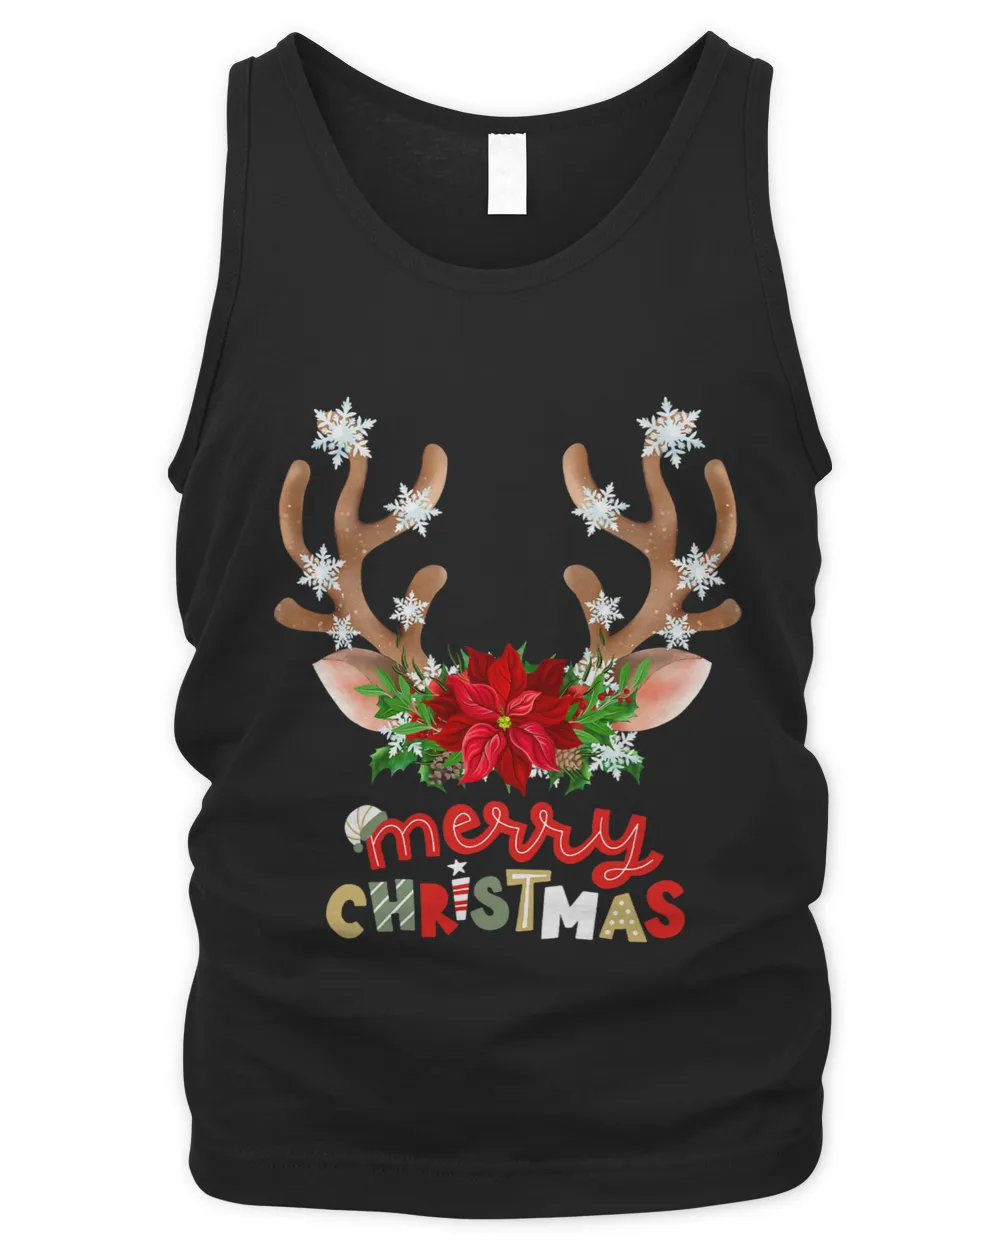 Christmas Poinsettia Flowers Reindeer Family Matching Group